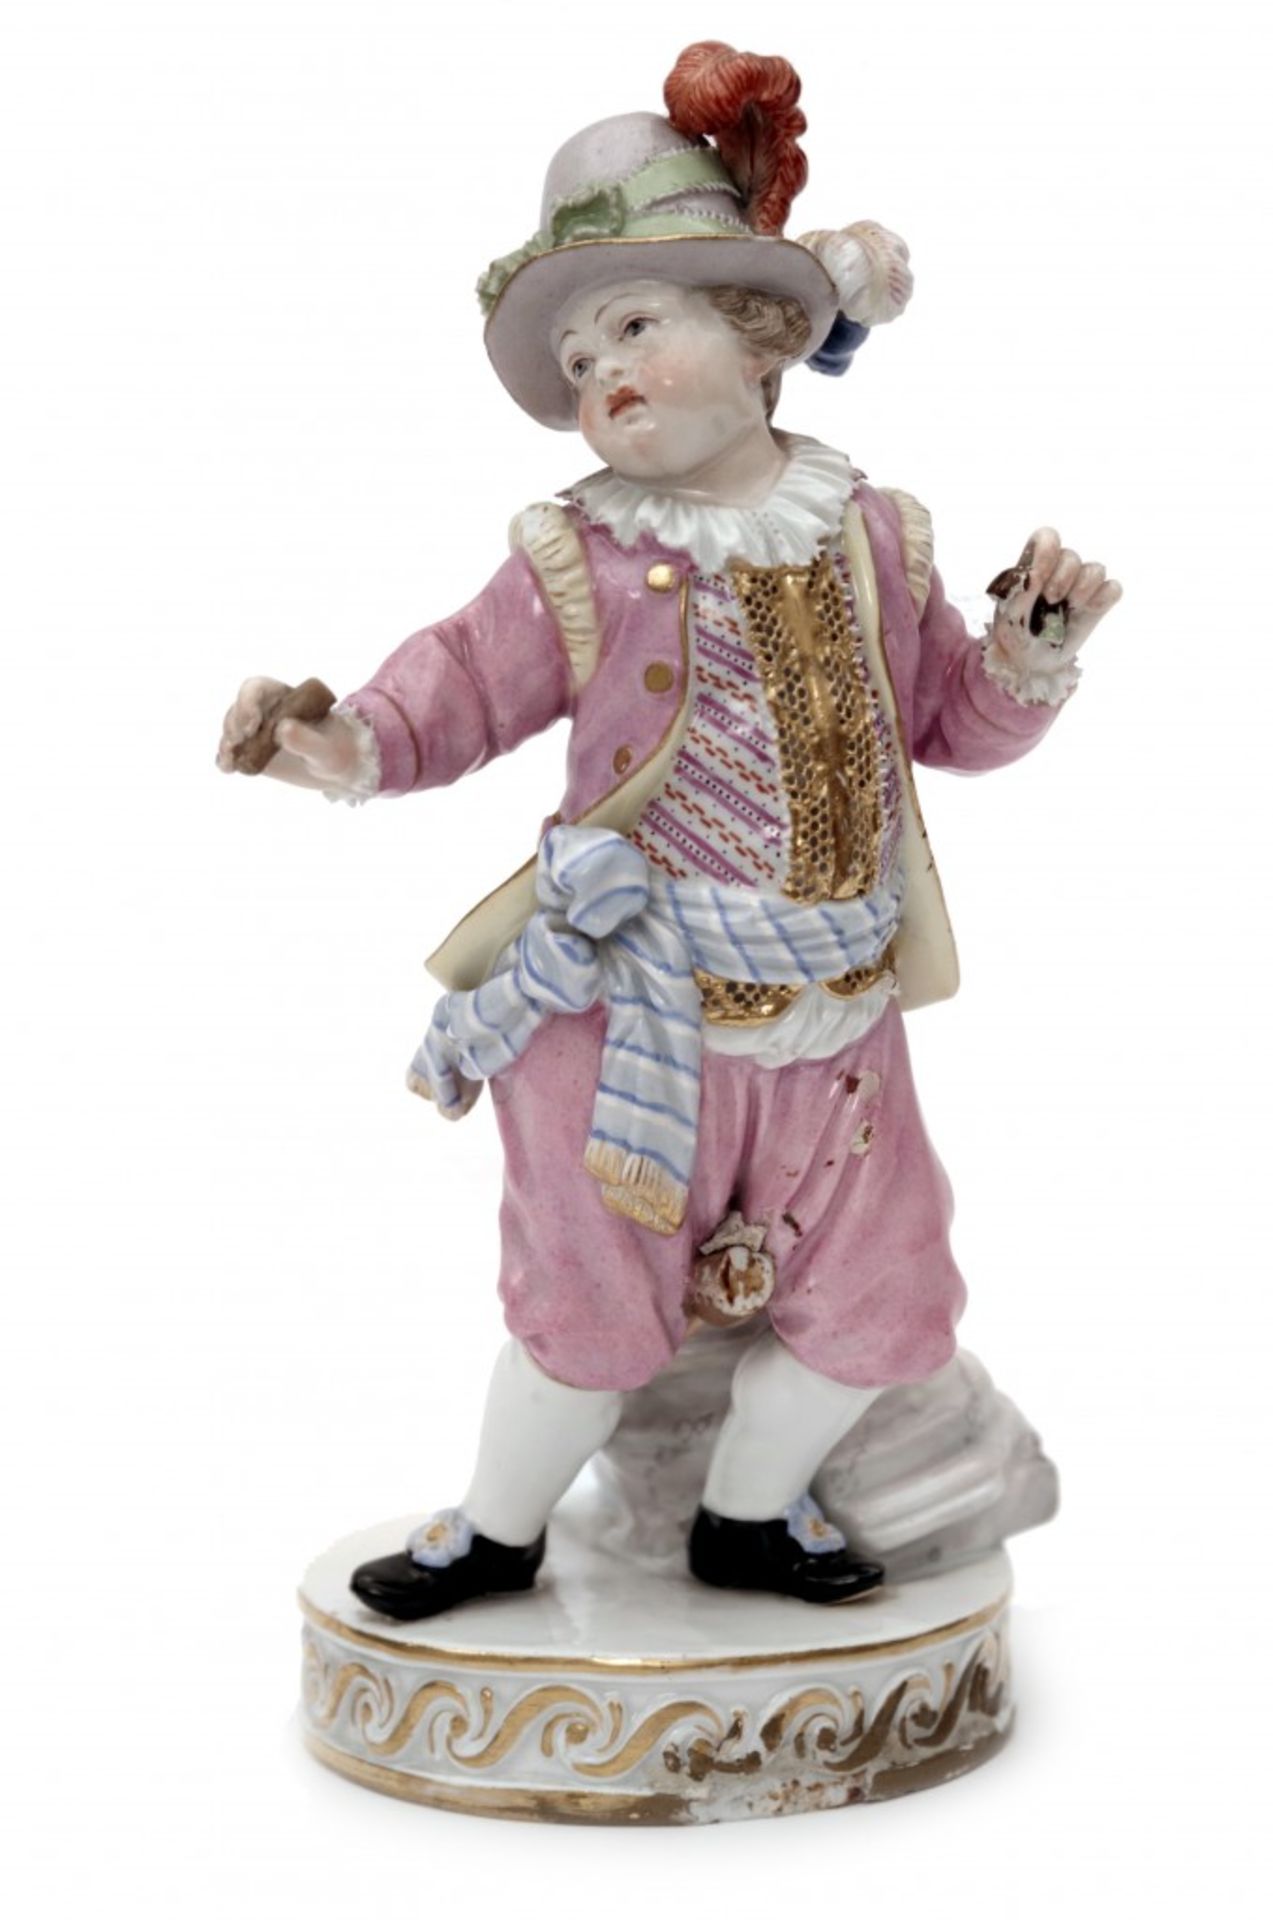 A Boy Riding on a Hobby-Horse Toy by Meissen